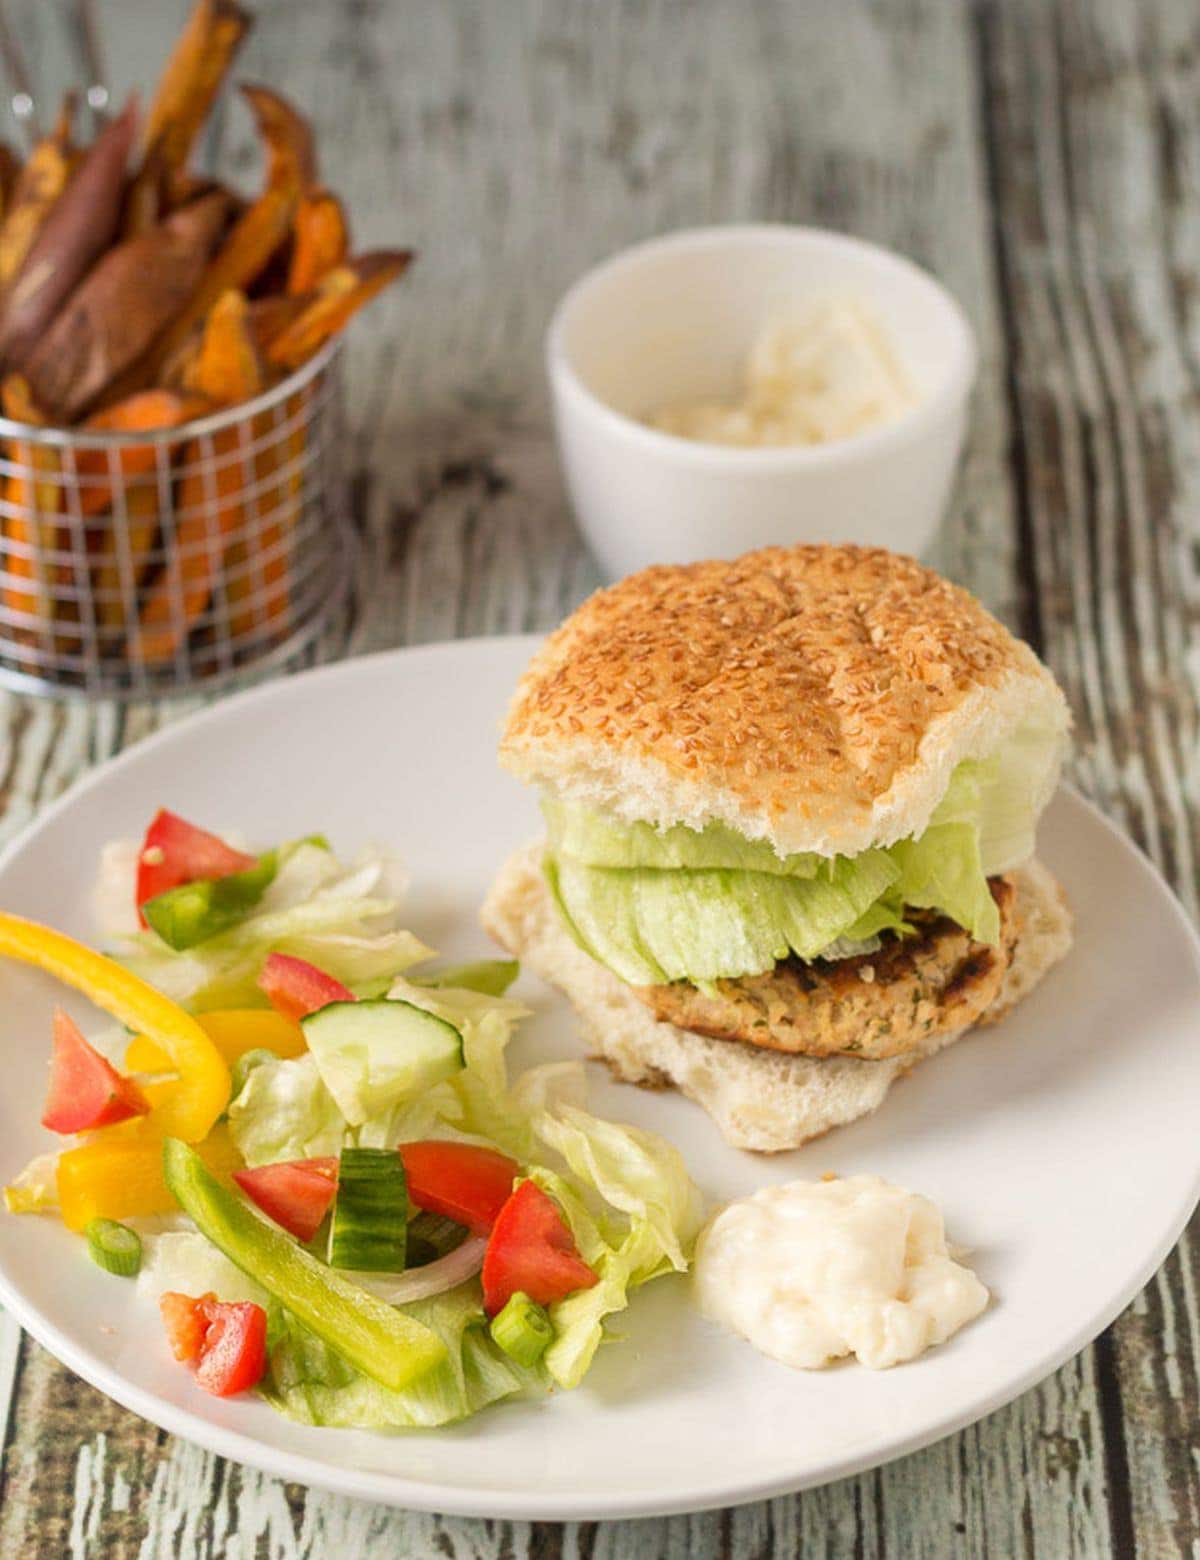 A quick healthy salmon burger served in a bun on a plate with salad. Pot of mayonnaise and basket of sweet potato fries in the background.